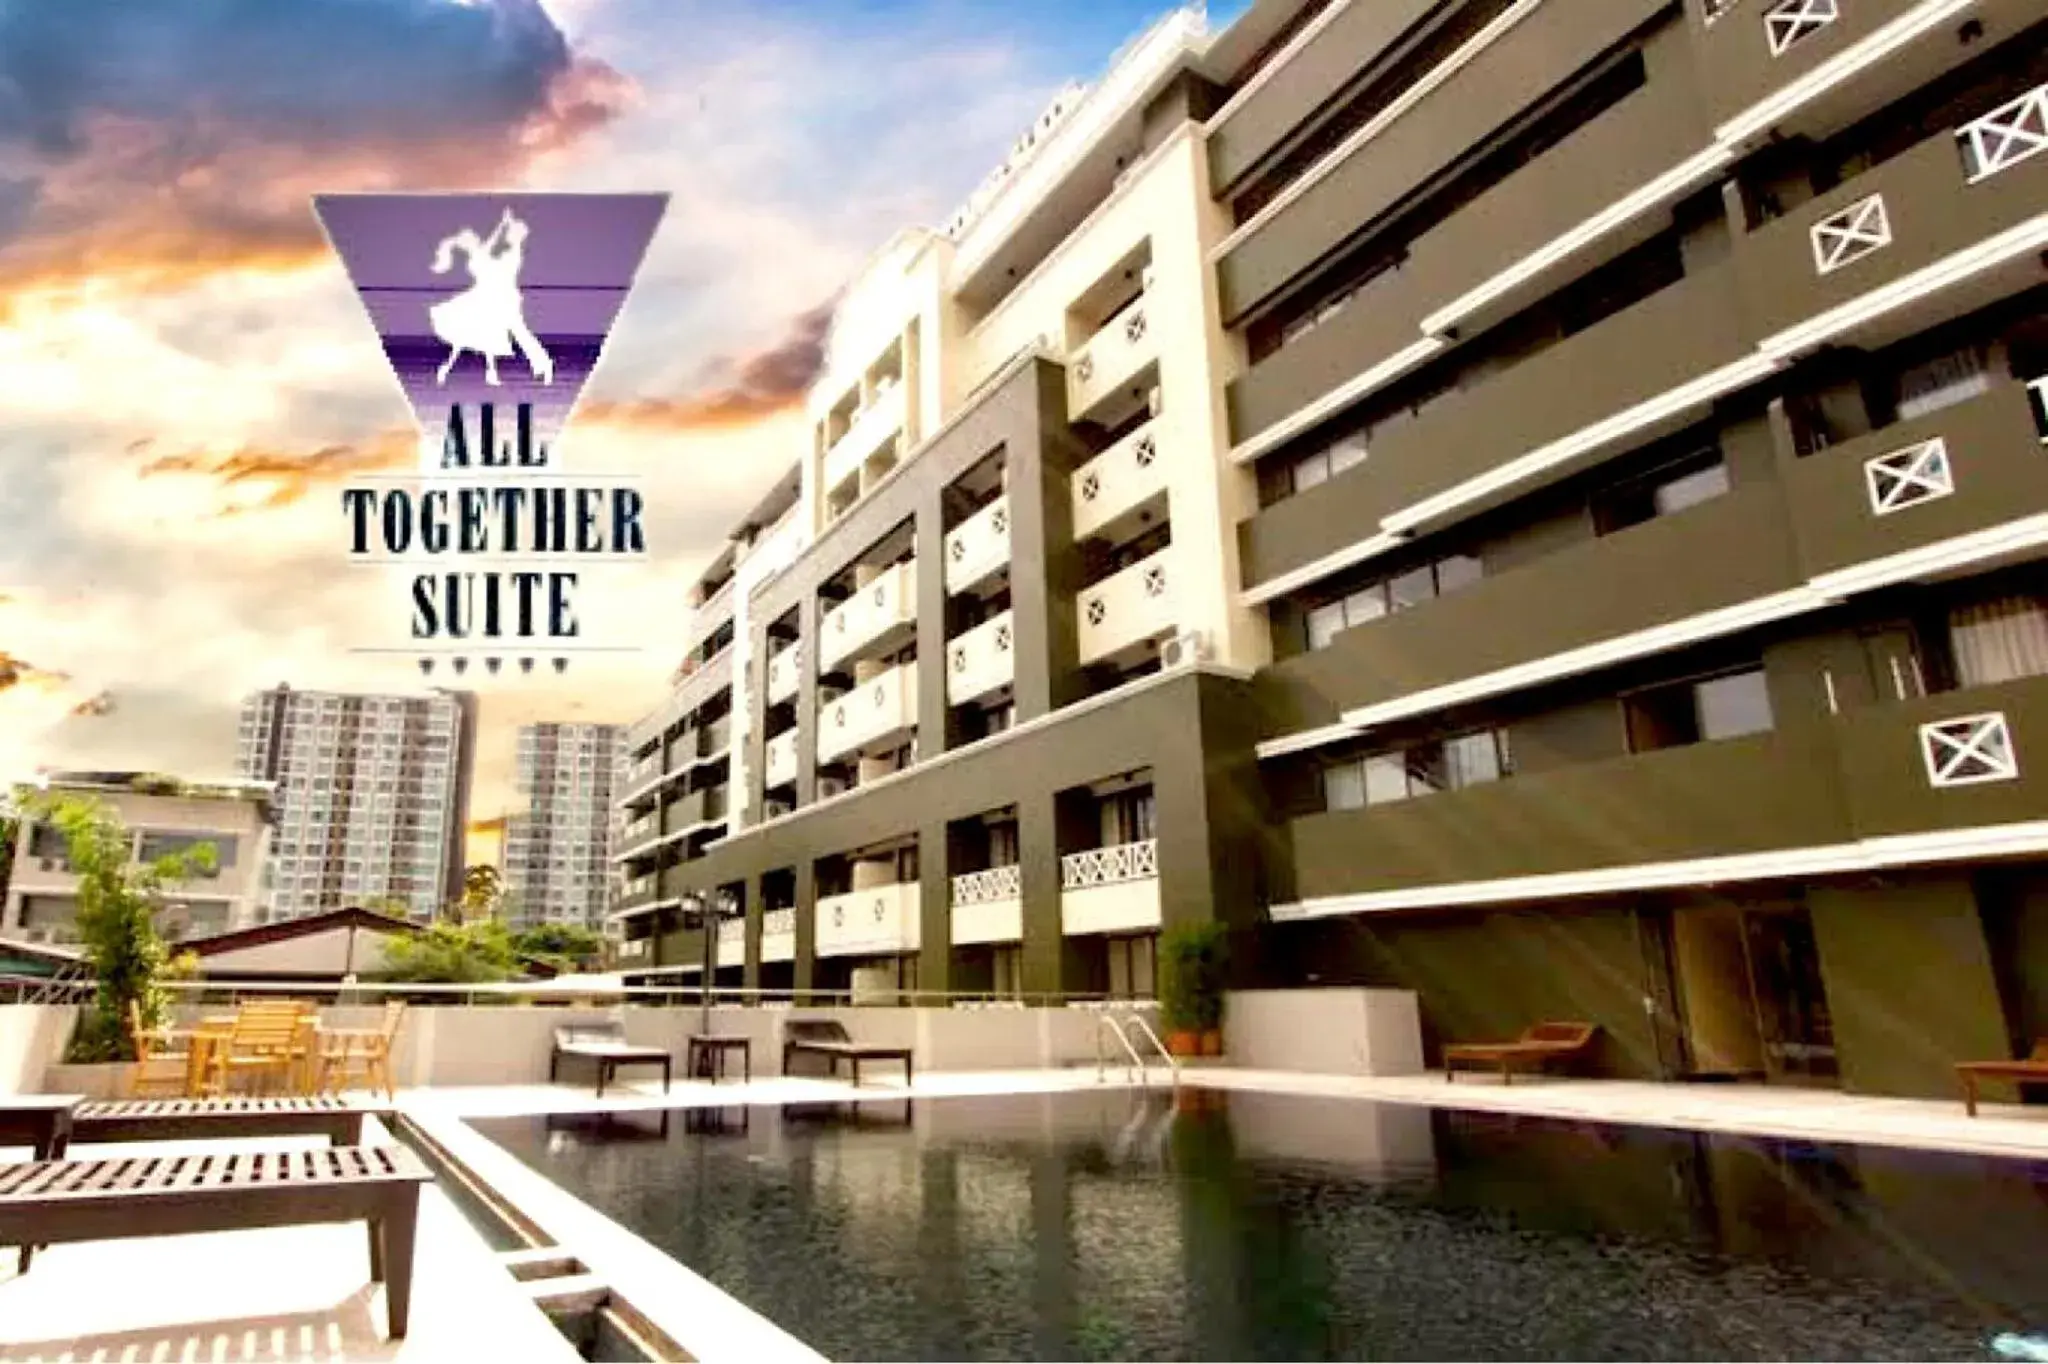 Property Building in All Together Suite Hotel